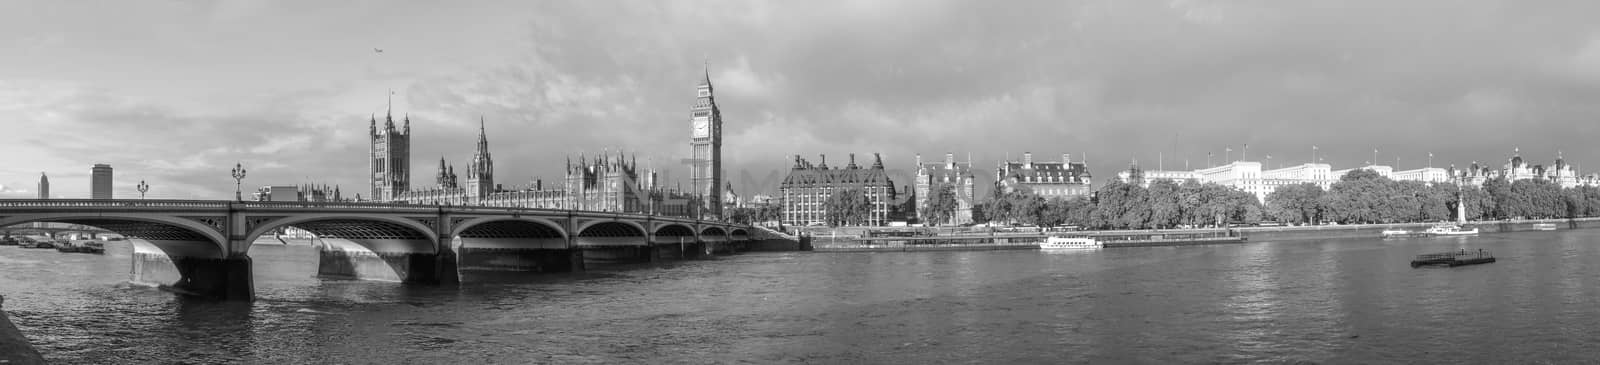 Houses of Parliament London by claudiodivizia